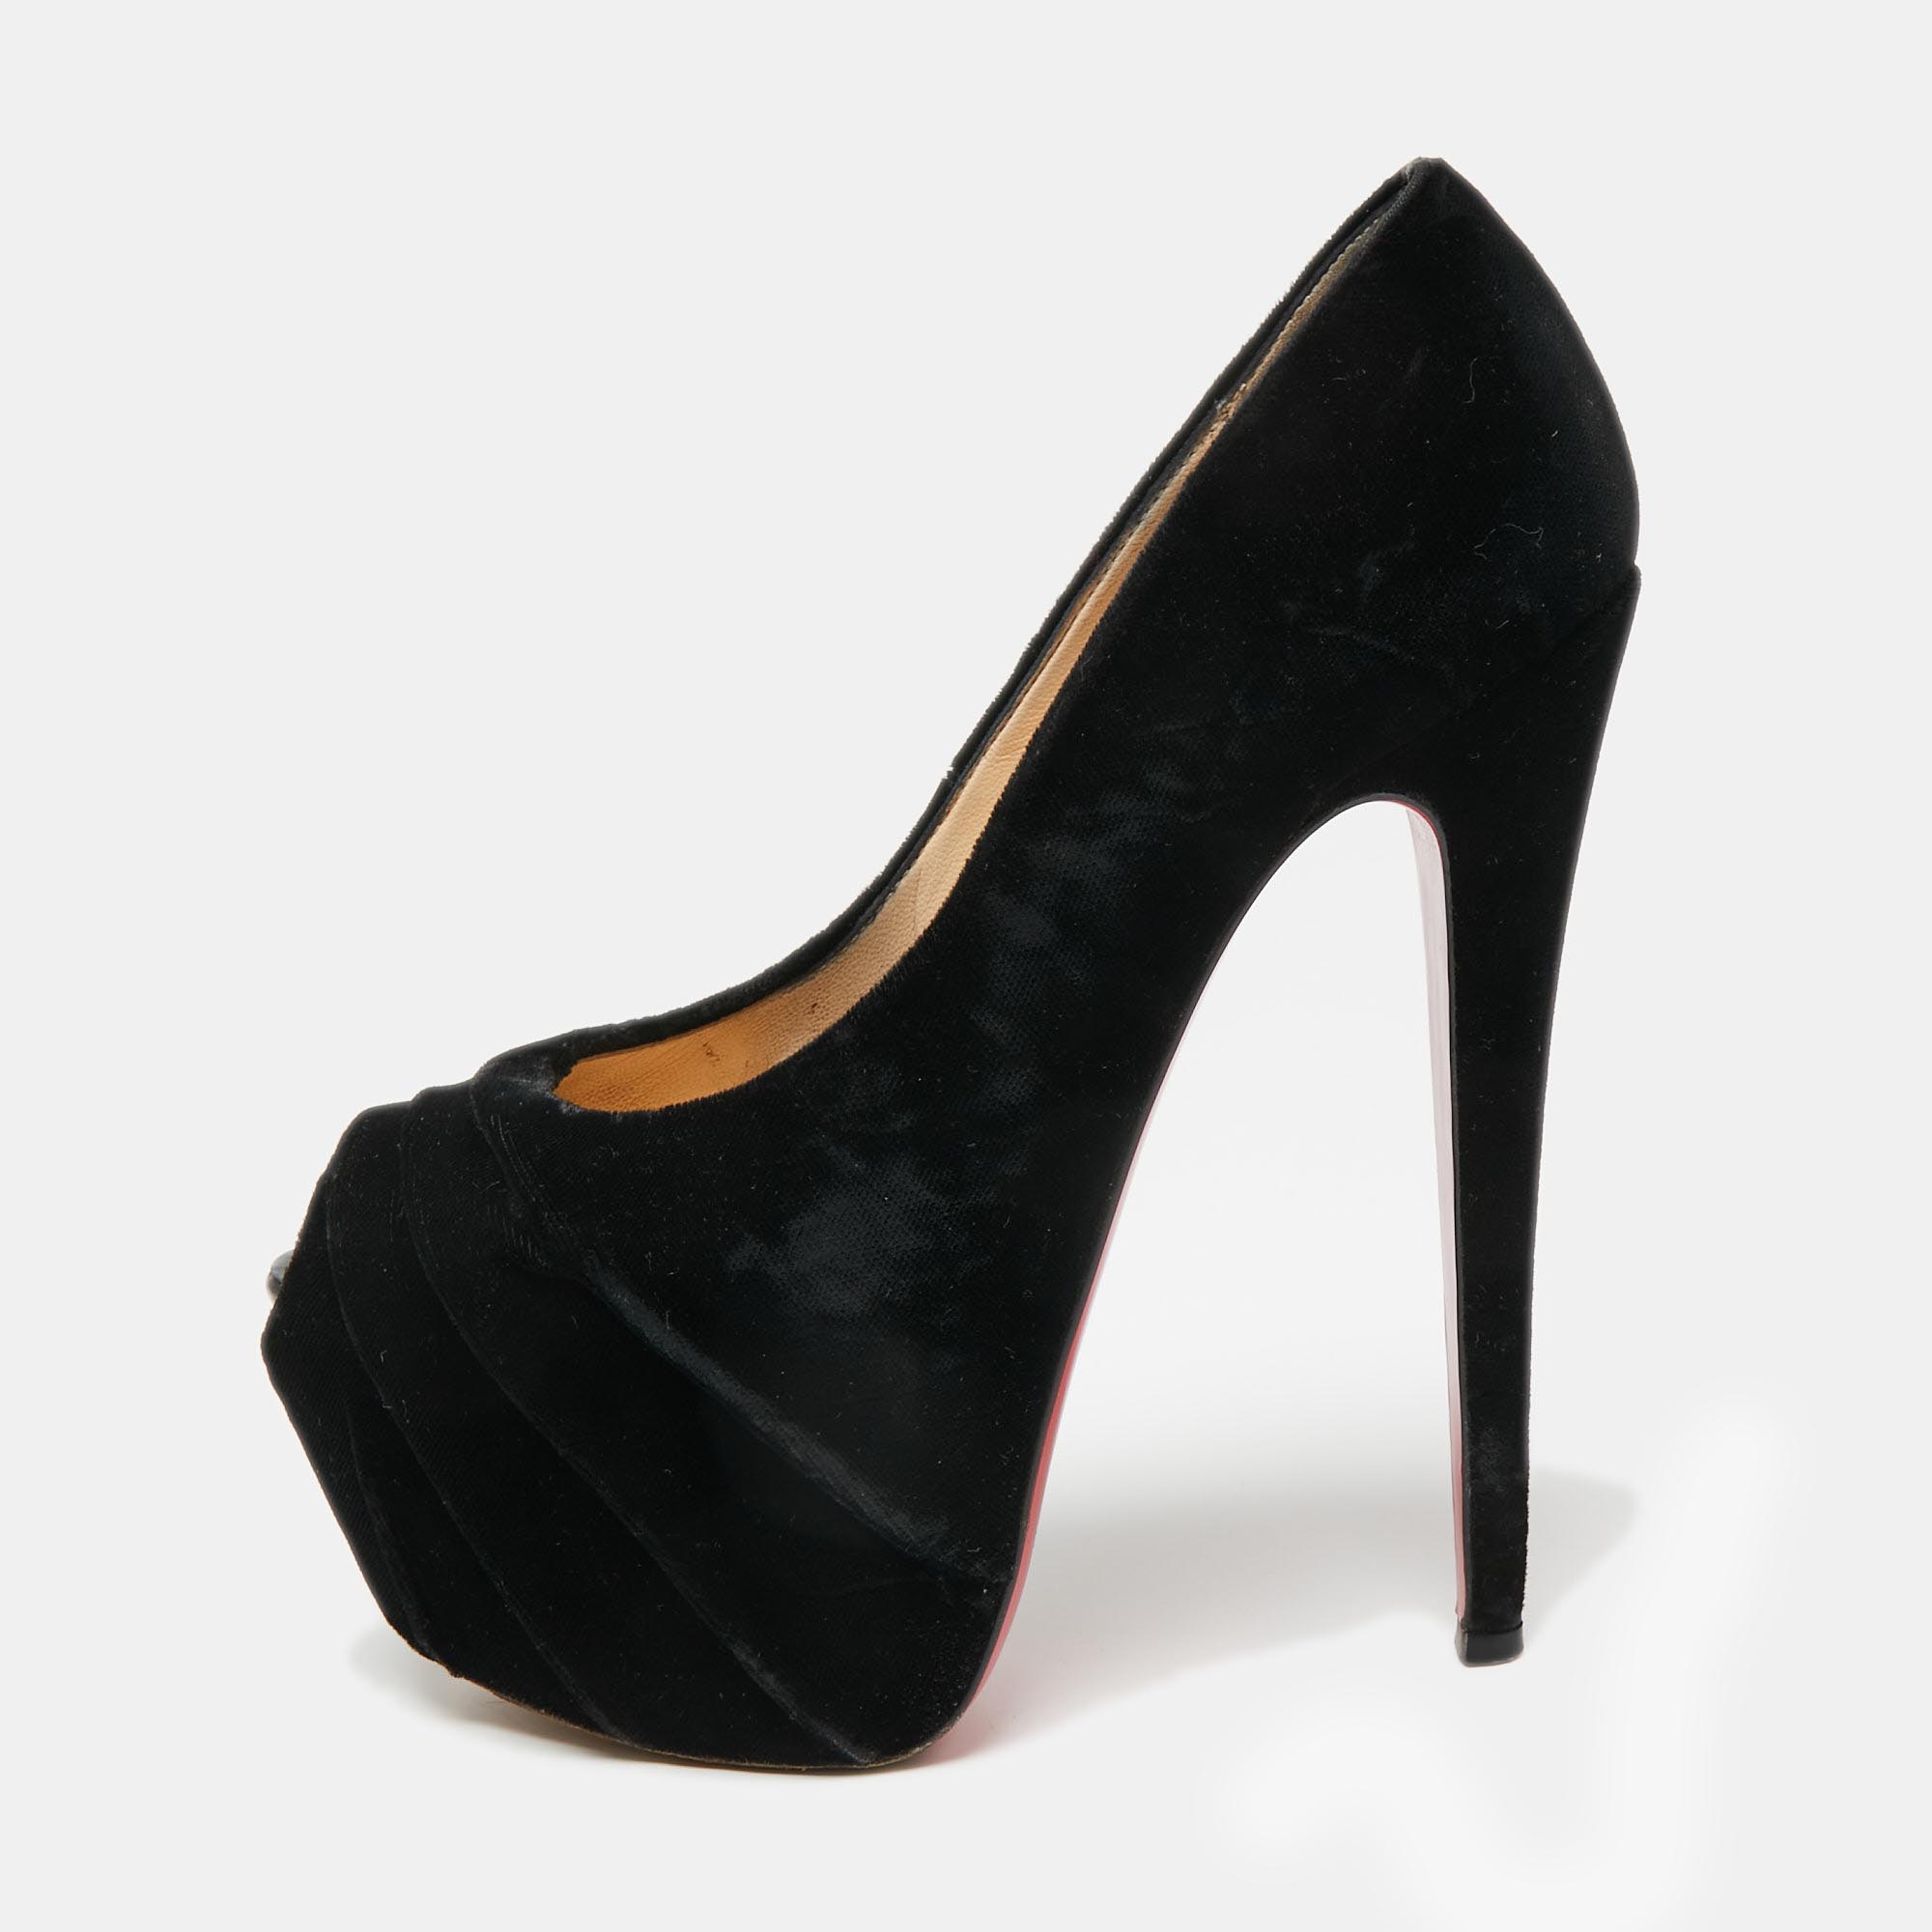 Made distinctive by the draped detailing on the vamps these Christian Louboutins have been crafted from soft velvet. In addition to ultra high heels they have concealed platforms for extra support. The black pumps also feature peep toes and are finished with the signature red soles.